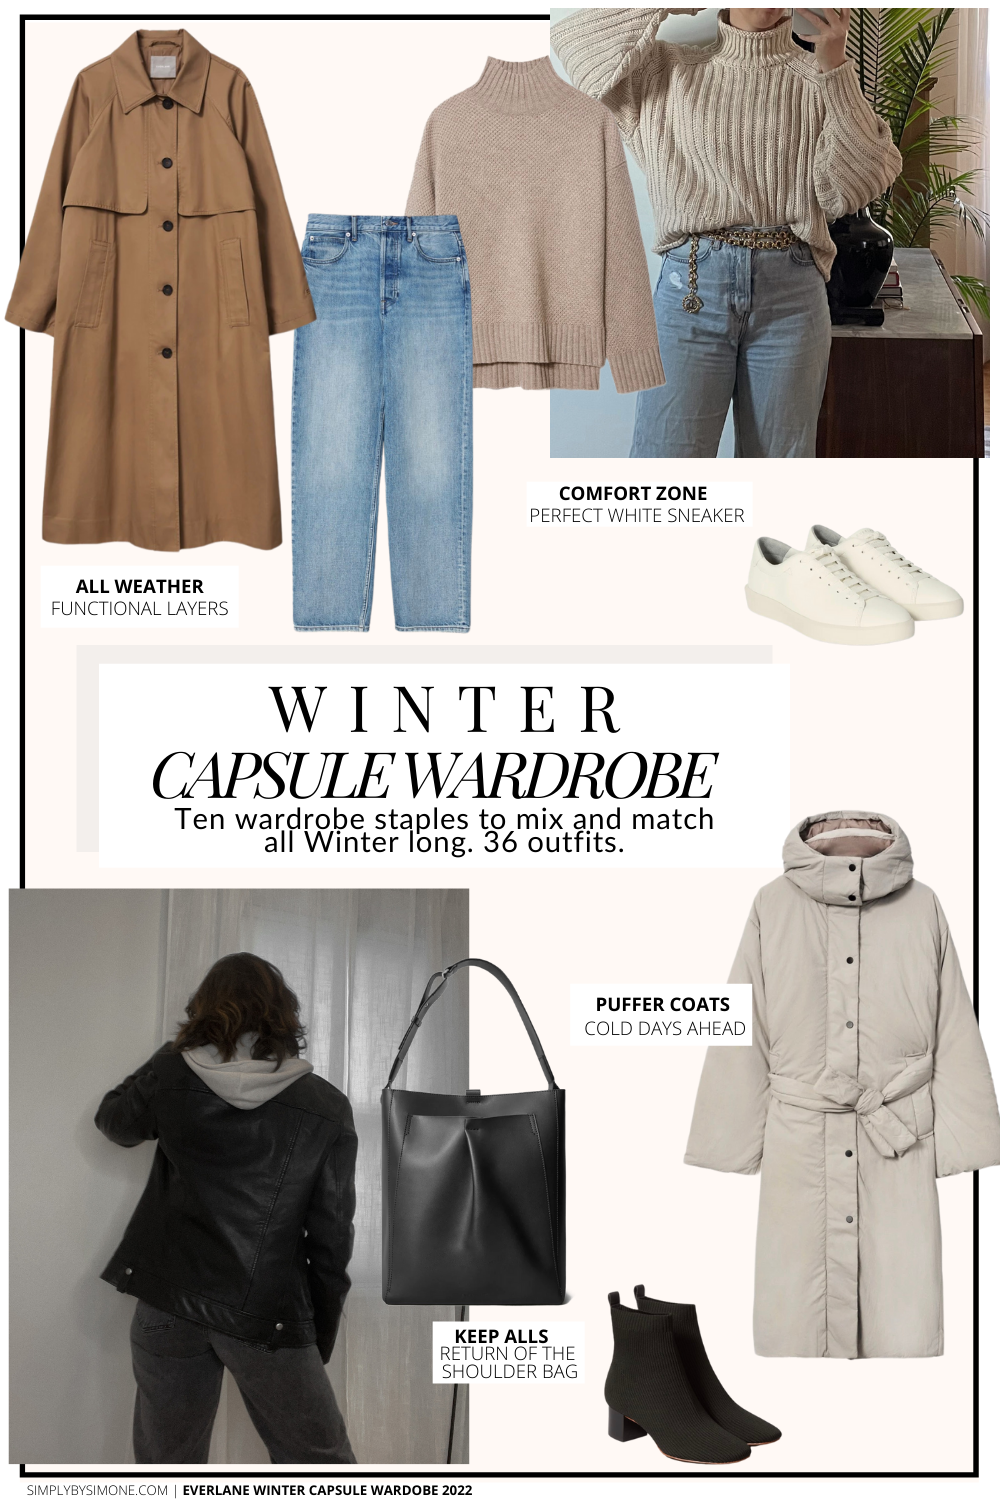 Everlane Winter Capsule Wardrobe – 10 Pieces, 36 Outfits